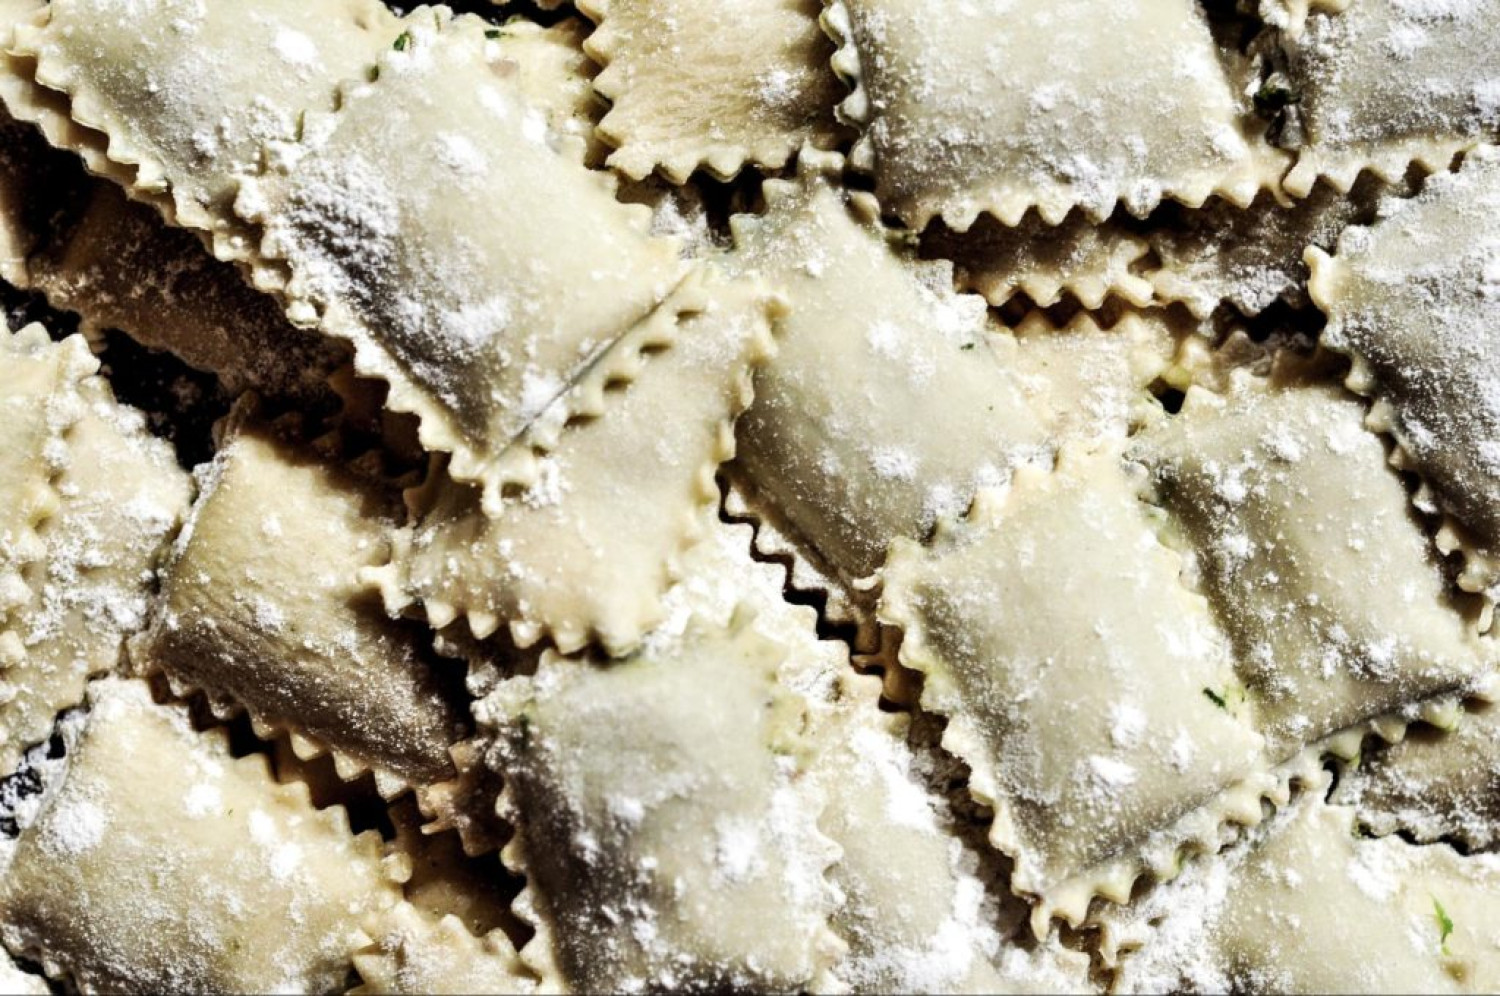 Freshly made ravioli pasta dusted with flour during pasta making - Online pasta making classes